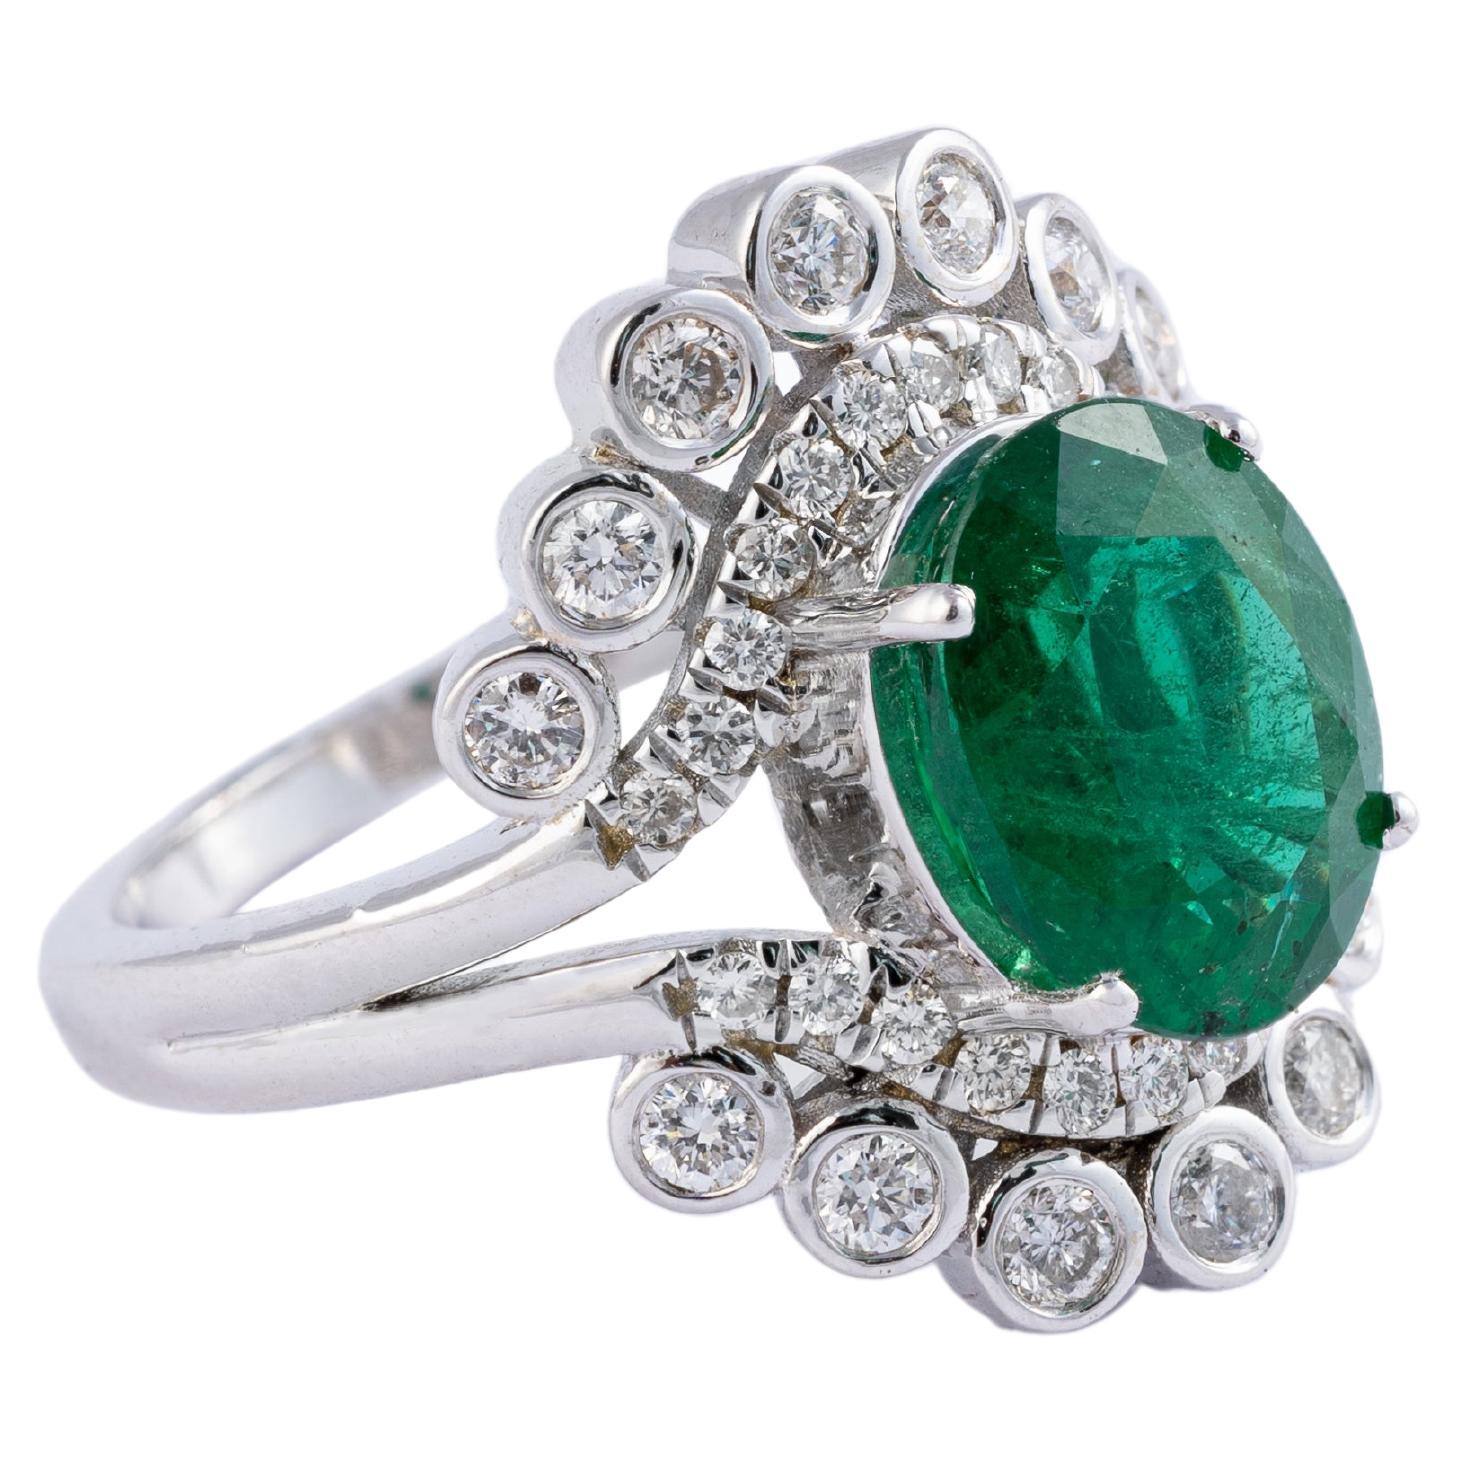 2.96cts Zambian Emerald Ring with 0.65cts Diamonds and 14k Gold